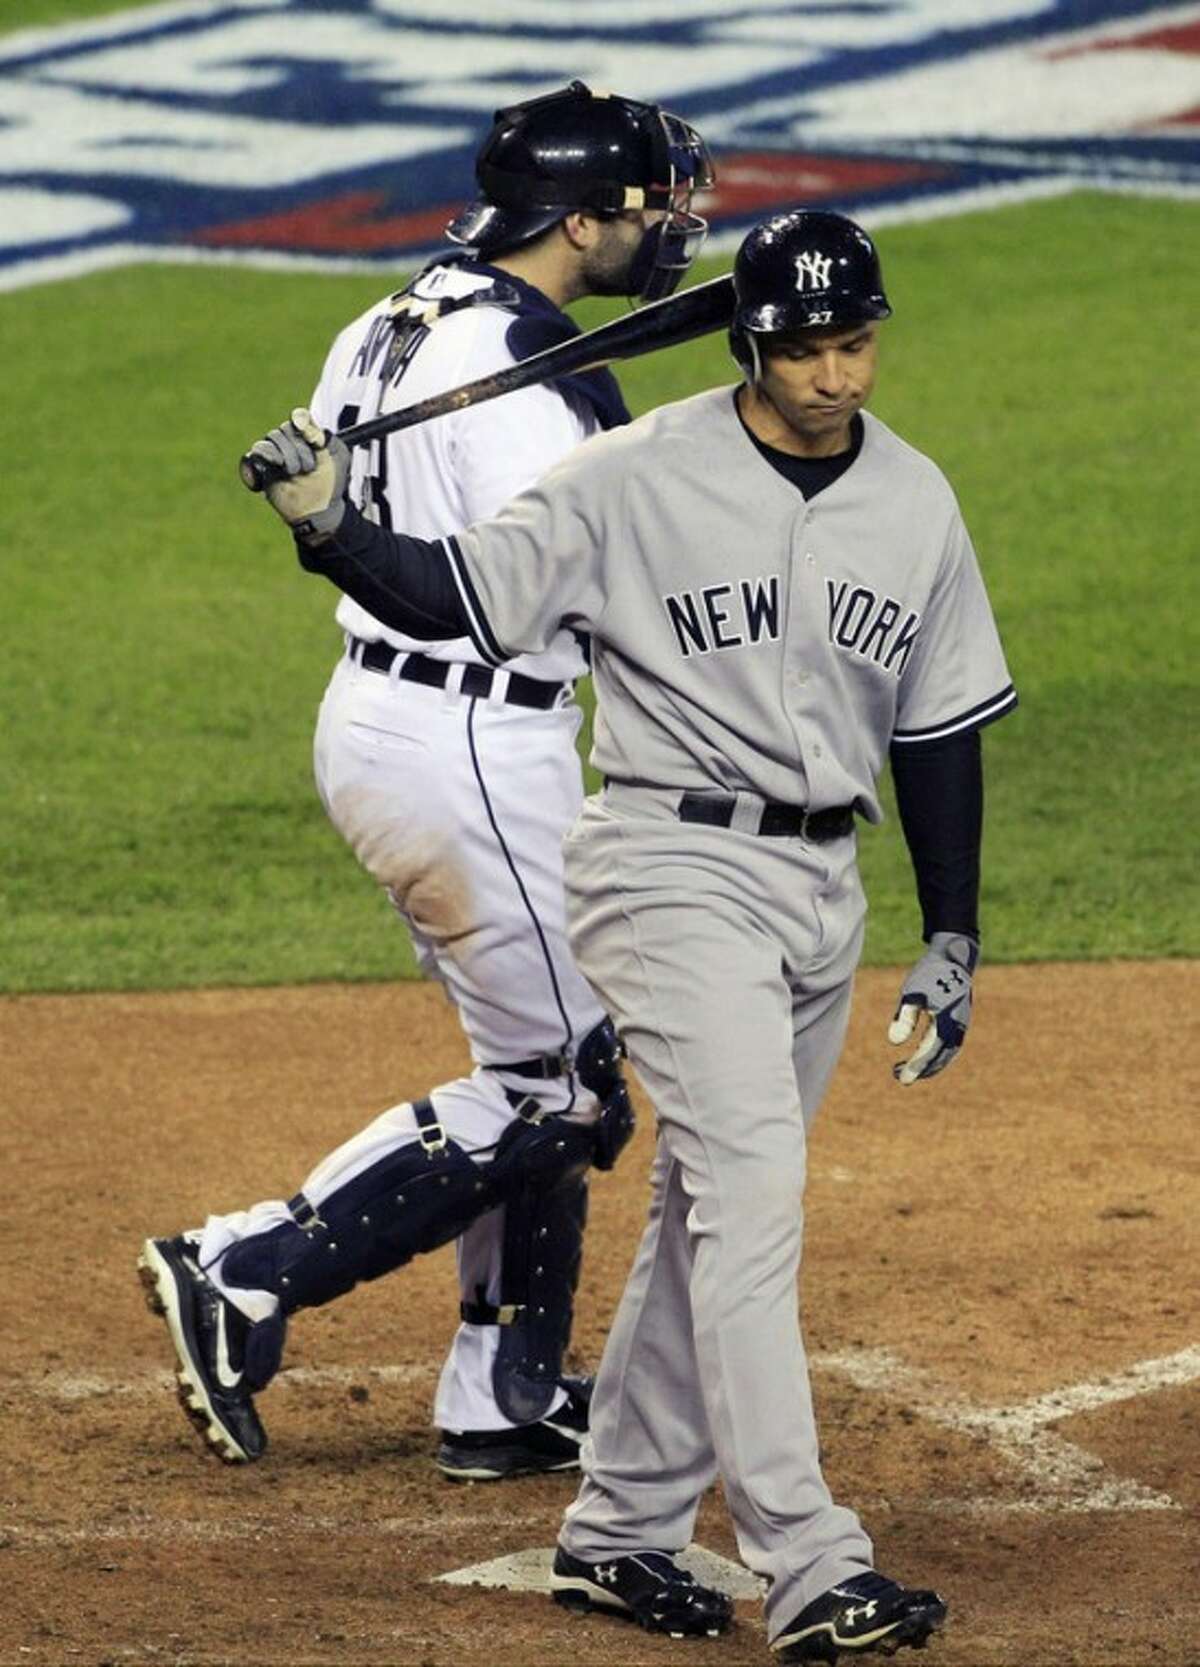 New York Yankees' Raul Ibanez reacts after striking out ending the game as Detroit Tigers' Alex Avila leaves home plate at Game 3 of the American League championship series Tuesday, Oct. 16, 2012, in Detroit. (AP Photo/Carlos Osorio)